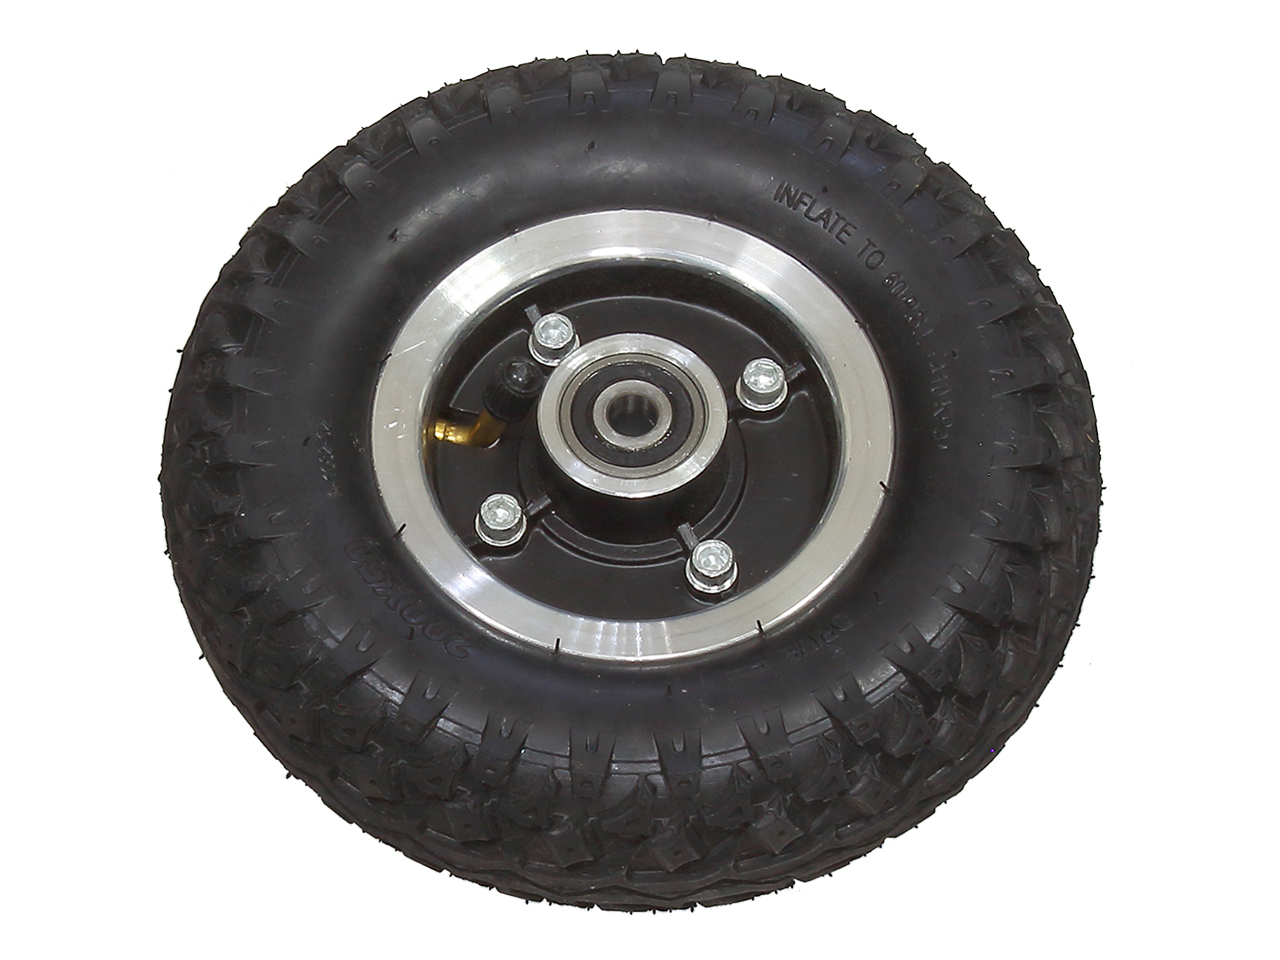 Sp1 - Replacement Wheel & Tire Snow Bike Dolly - SC-12011A